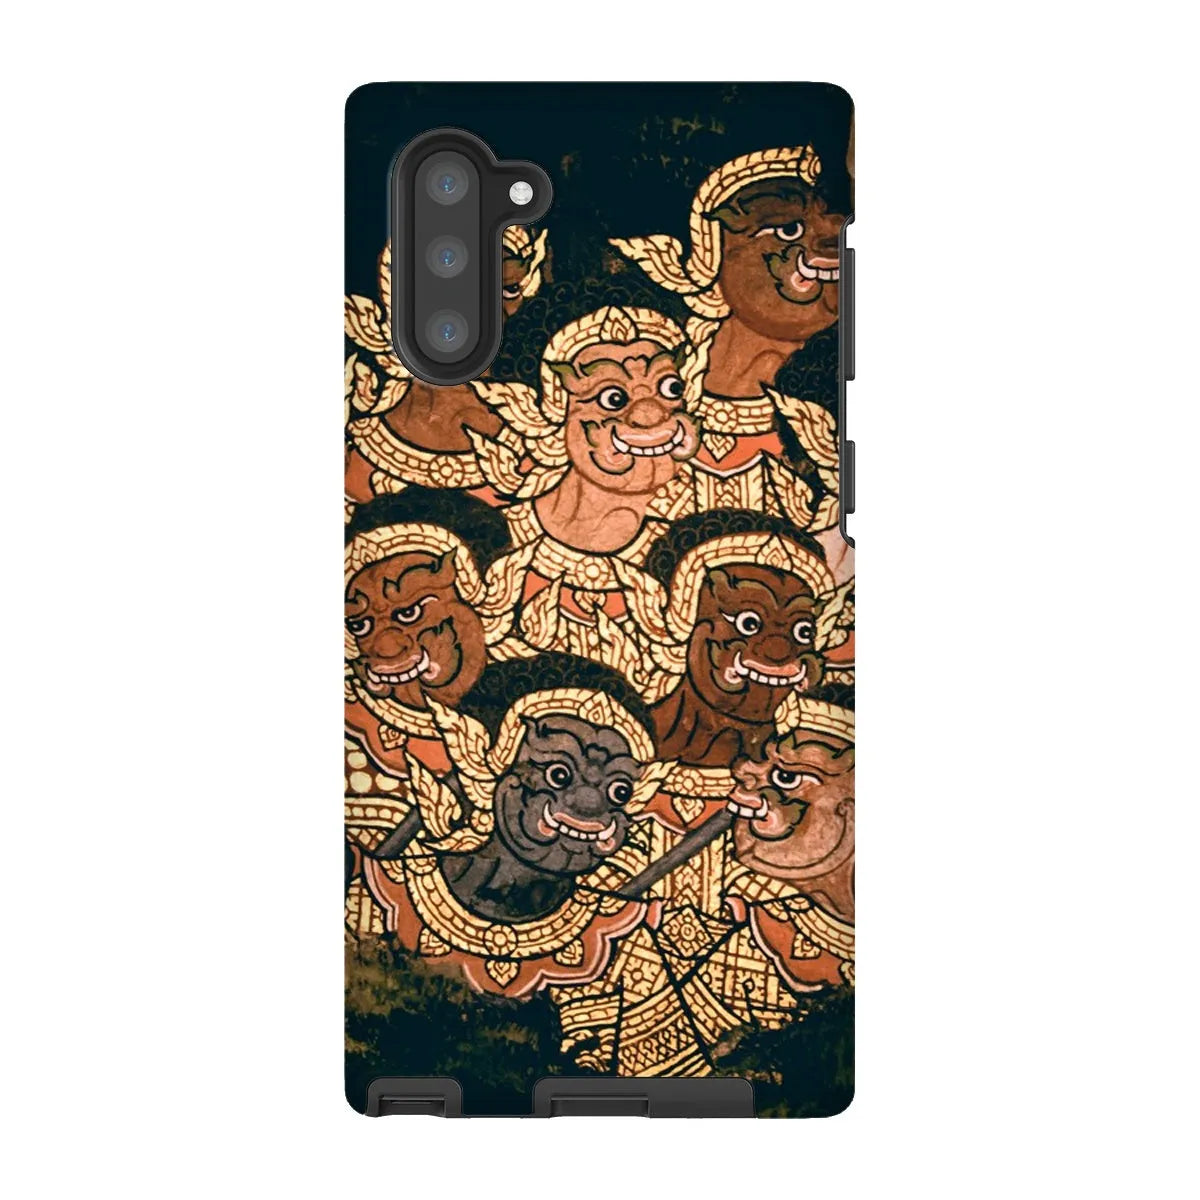 Babes In The Woods - Traditional Thai Myth Phone Case - Samsung Galaxy Note 10 / Matte - Mobile Phone Cases - Aesthetic